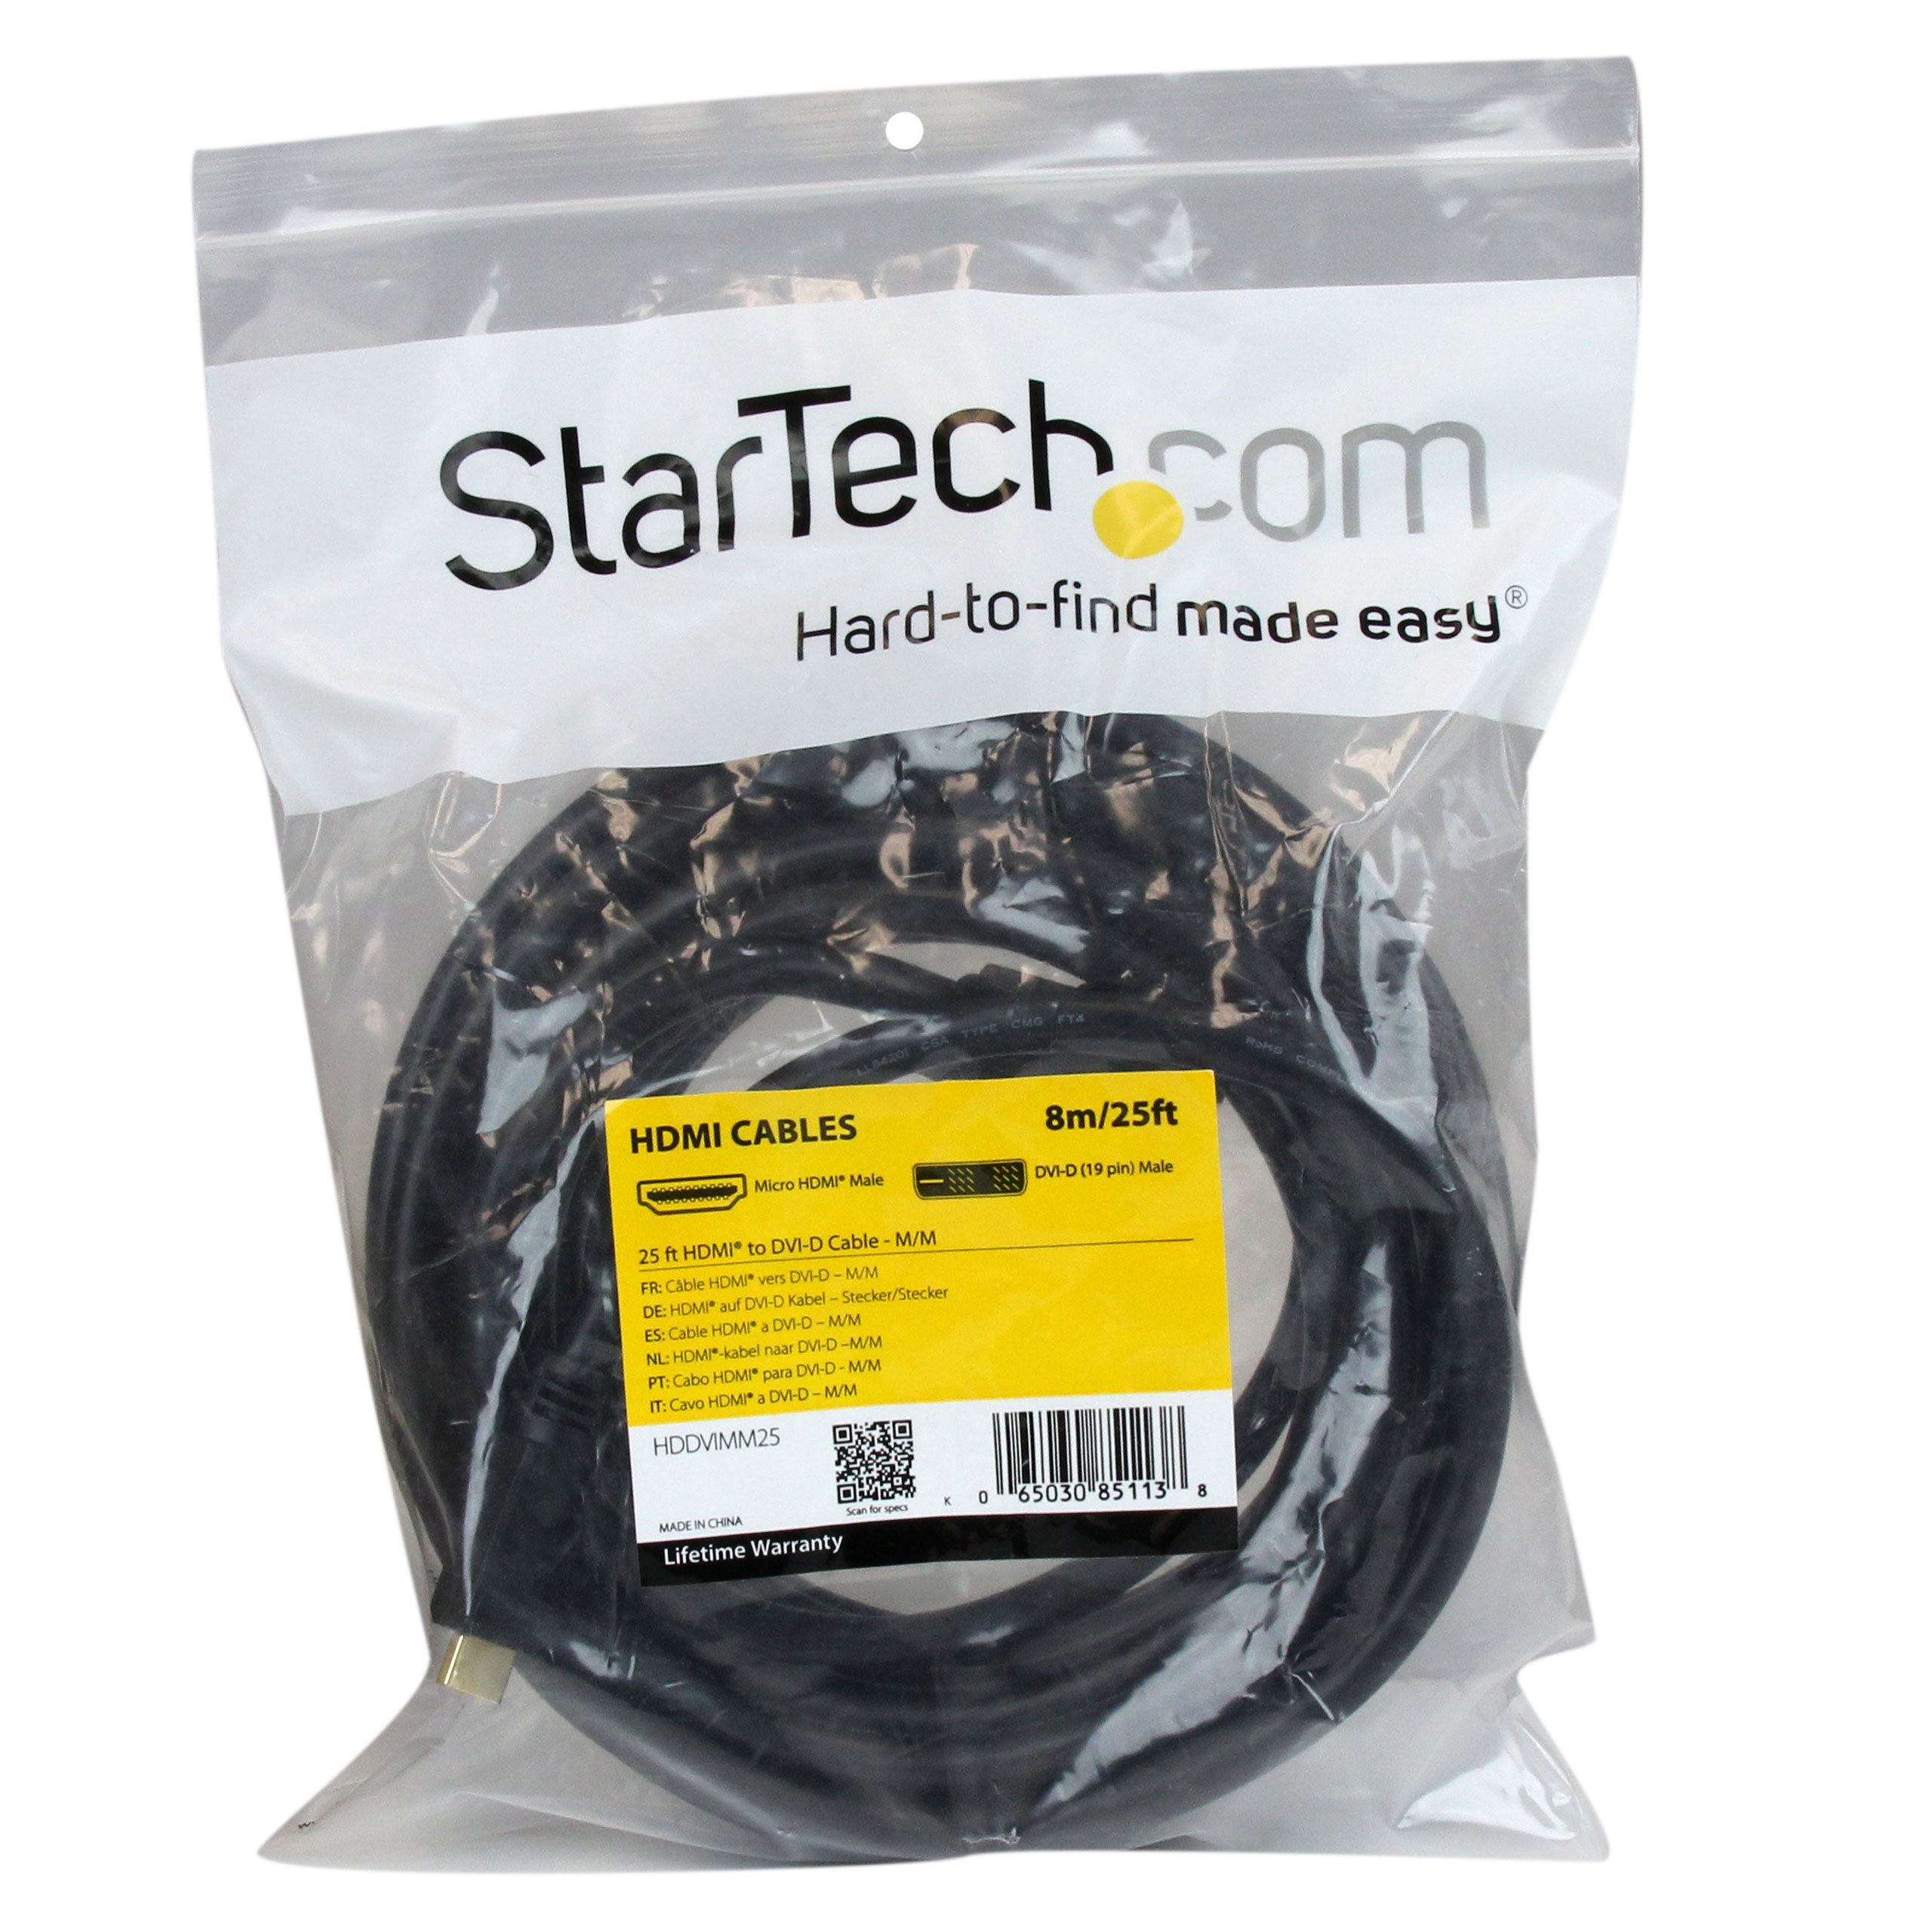 StarTech.com HDDVIMM25 25 ft. HDMI to DVI-D Cable 